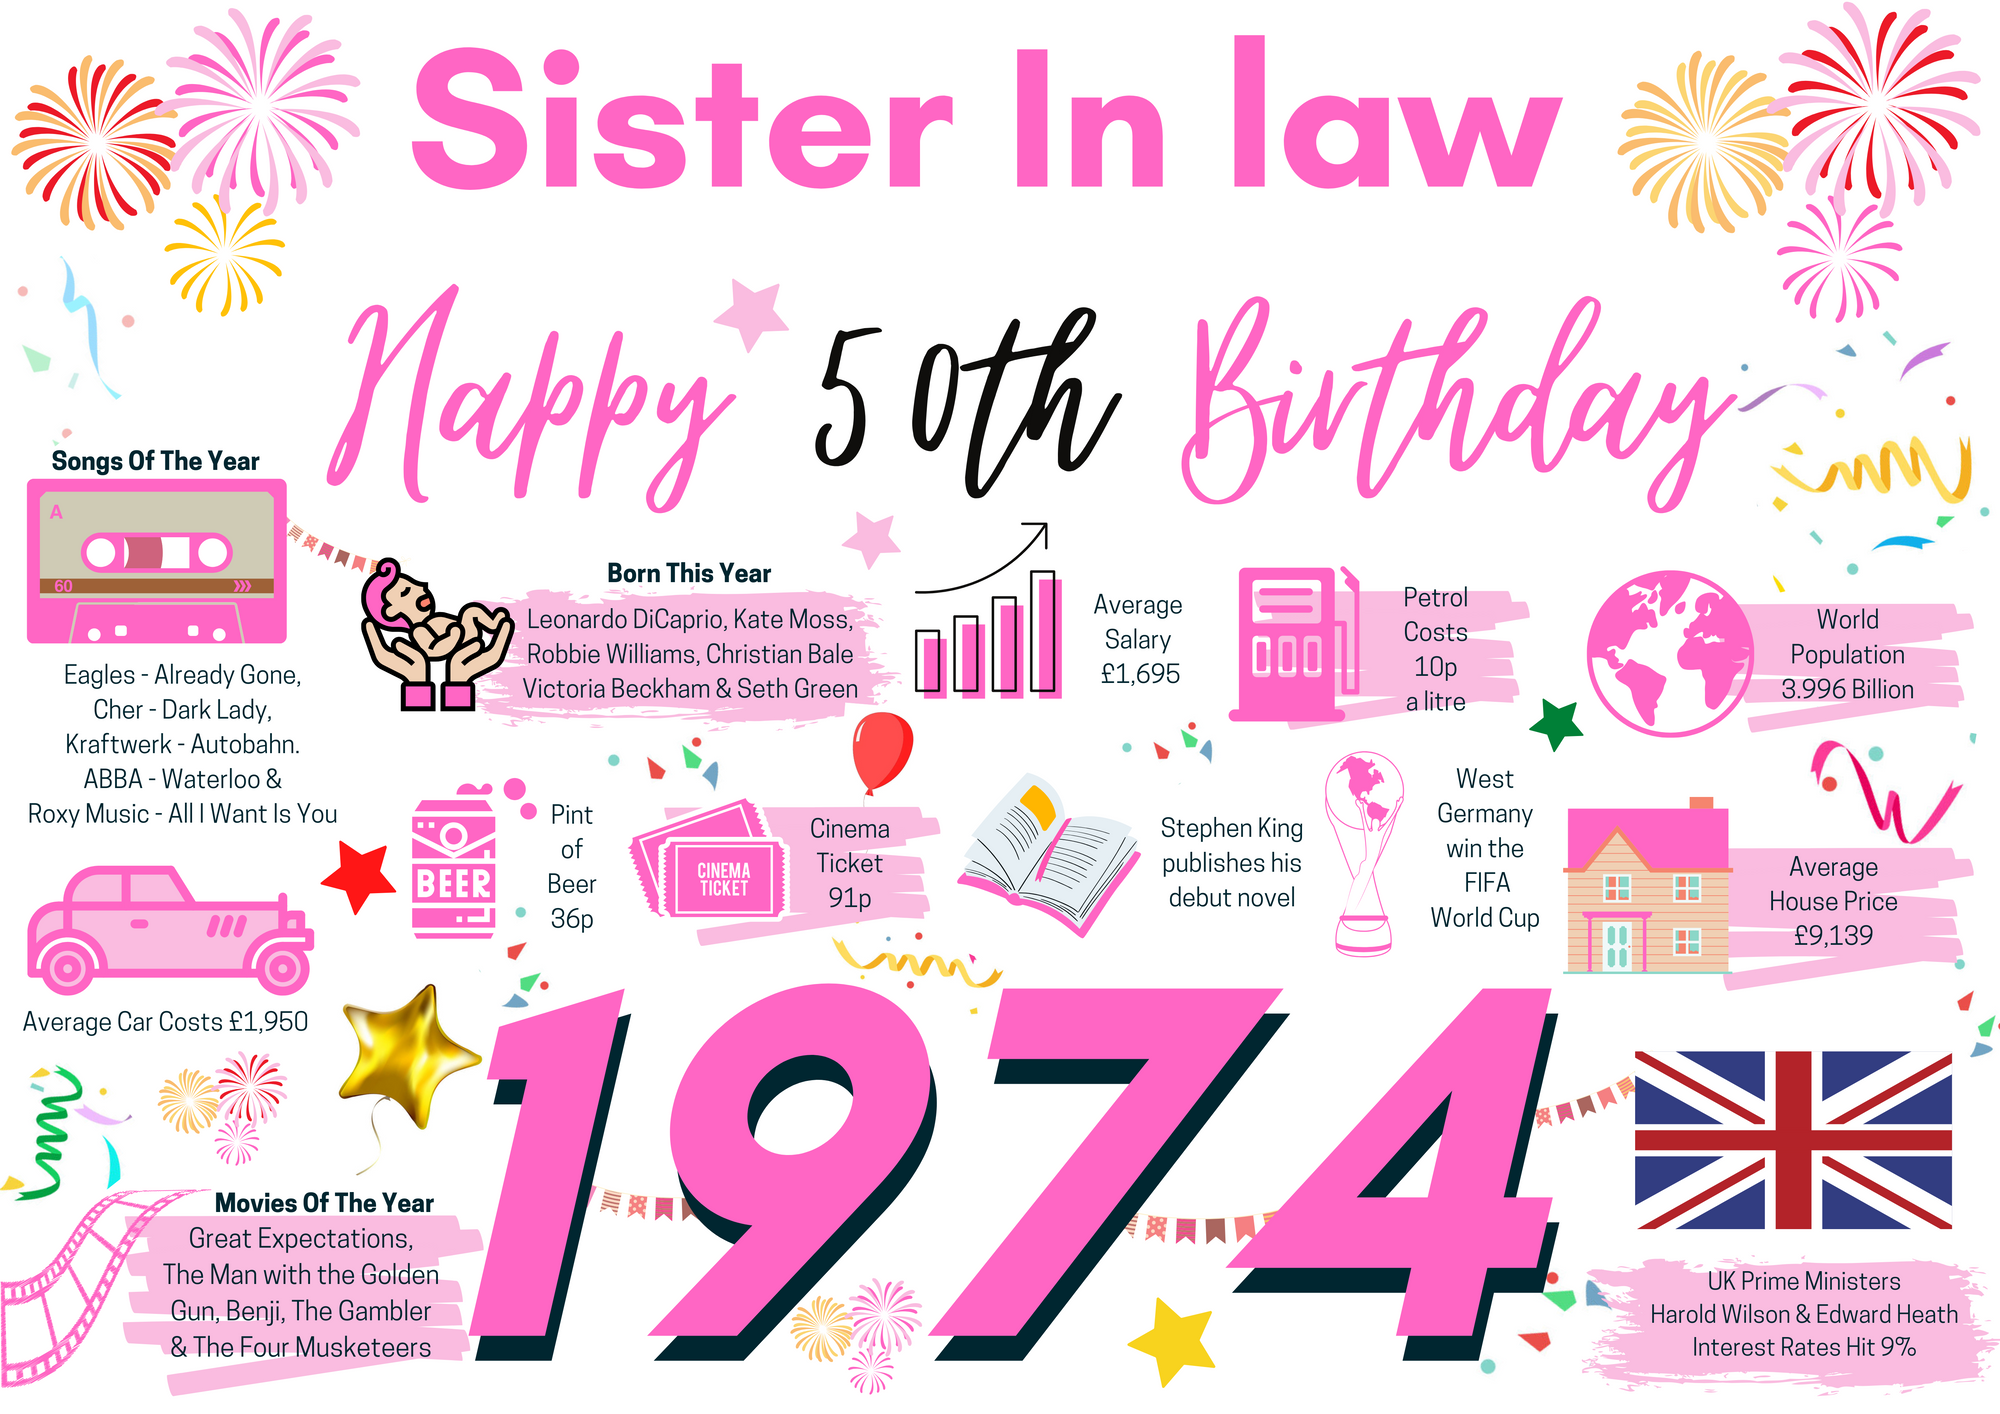 50th Birthday Card For Sister In Law, Born In 1974 Facts Milestone